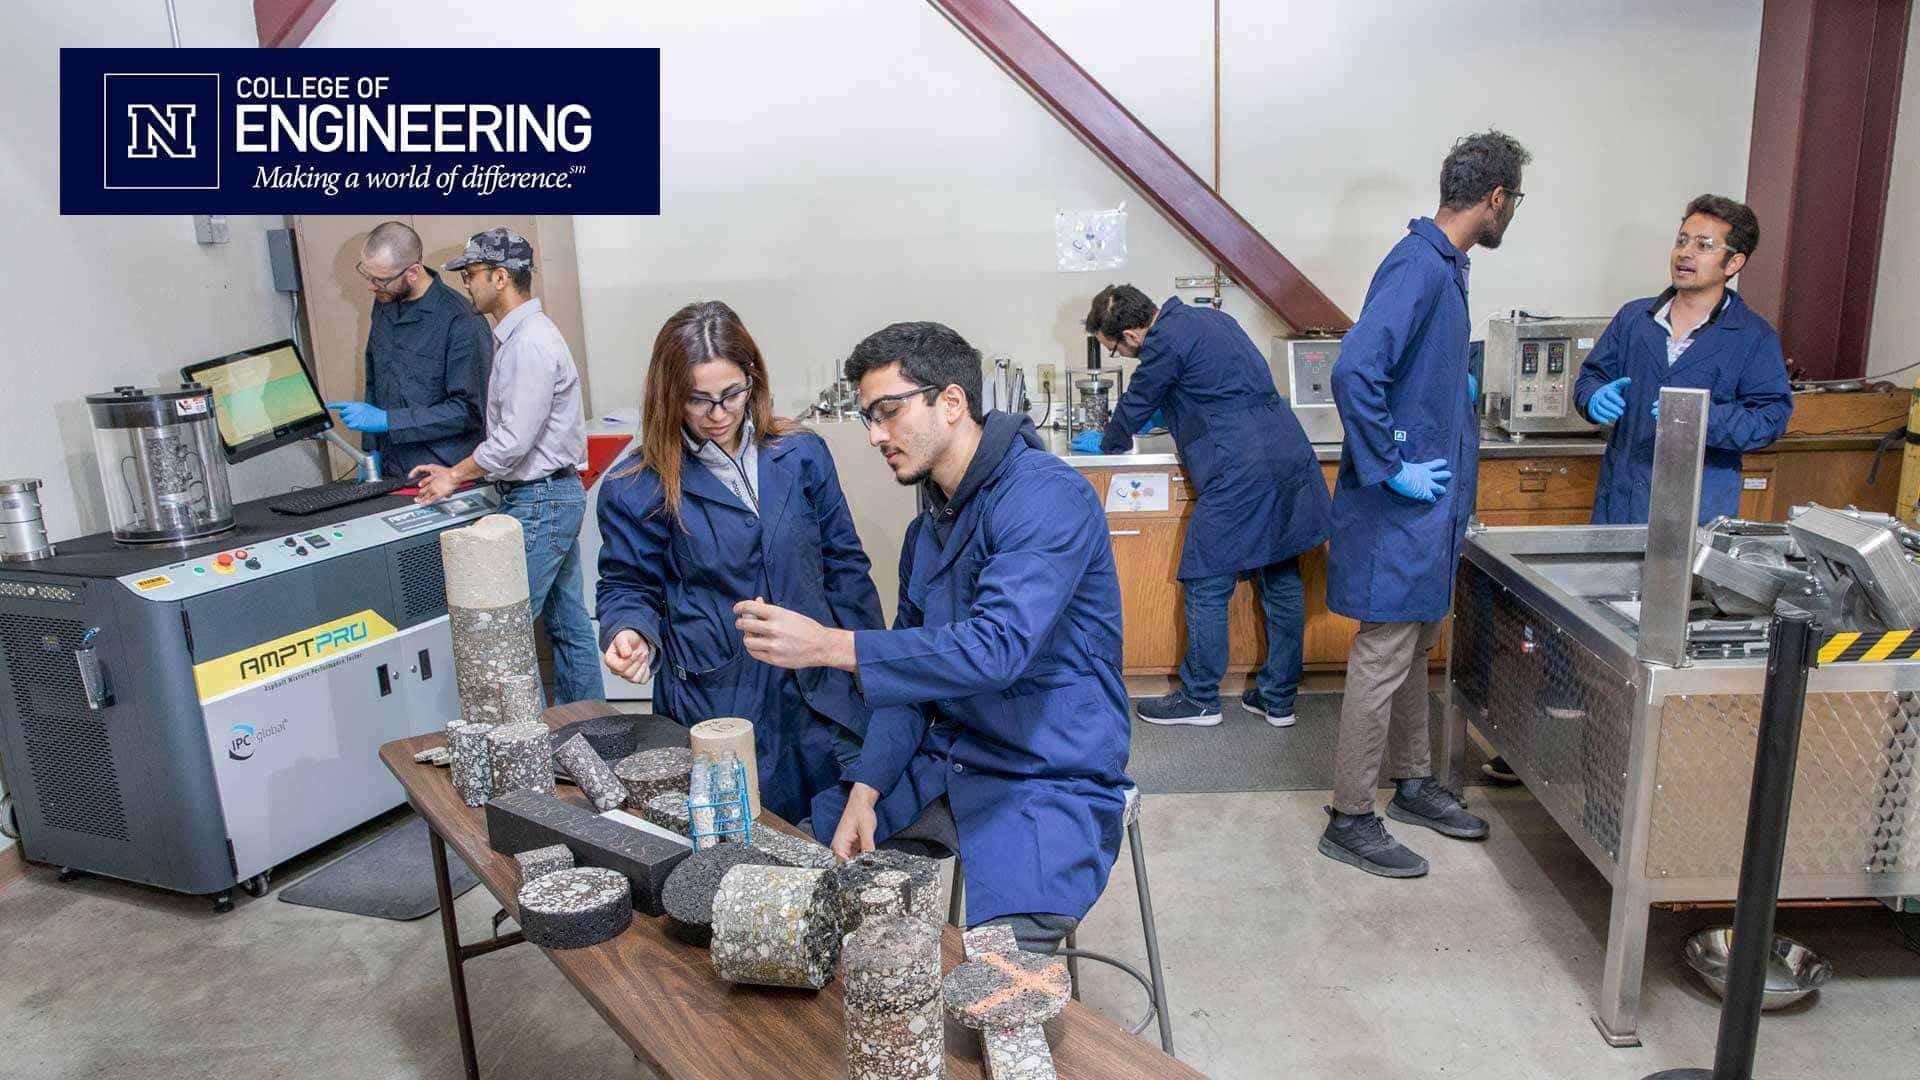 Students in pavements lab with College of Engineering logo